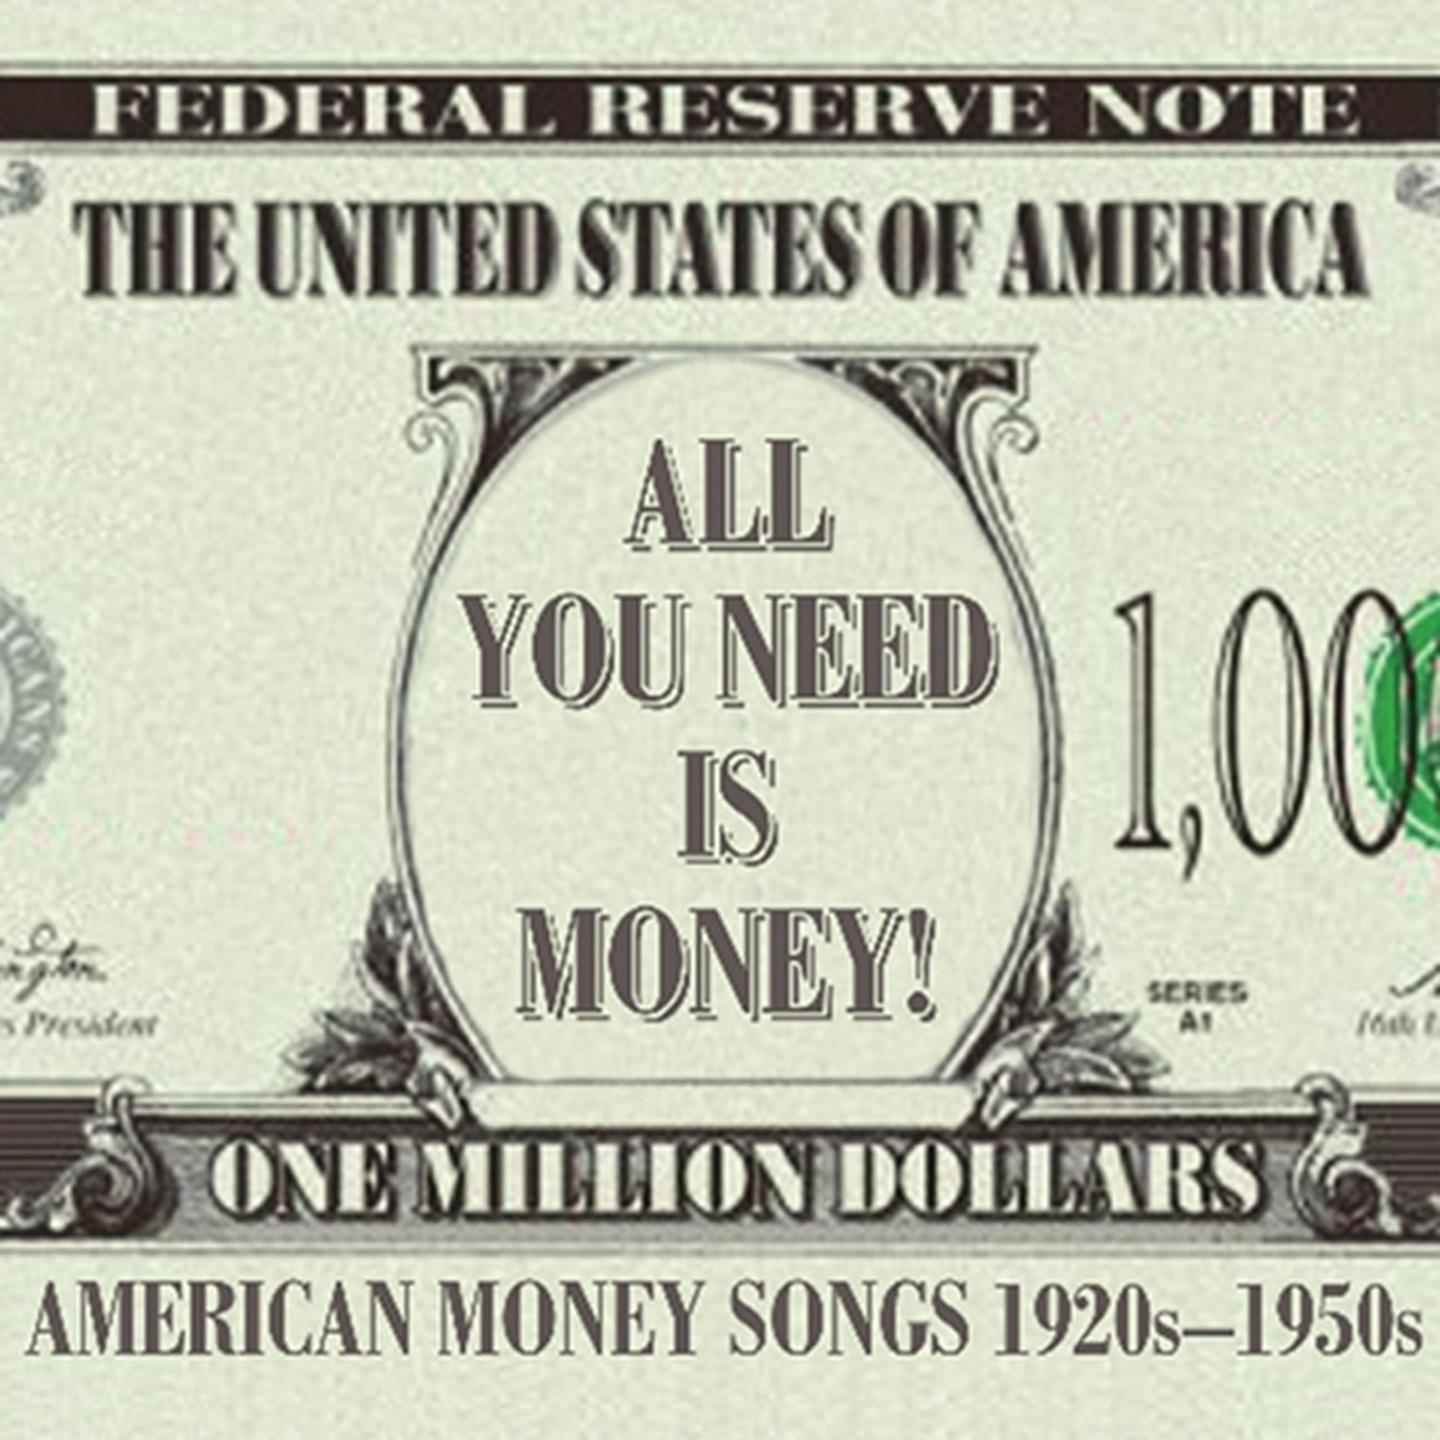 All You Need Is Money! (American Money Songs from the 1920s-1950s)